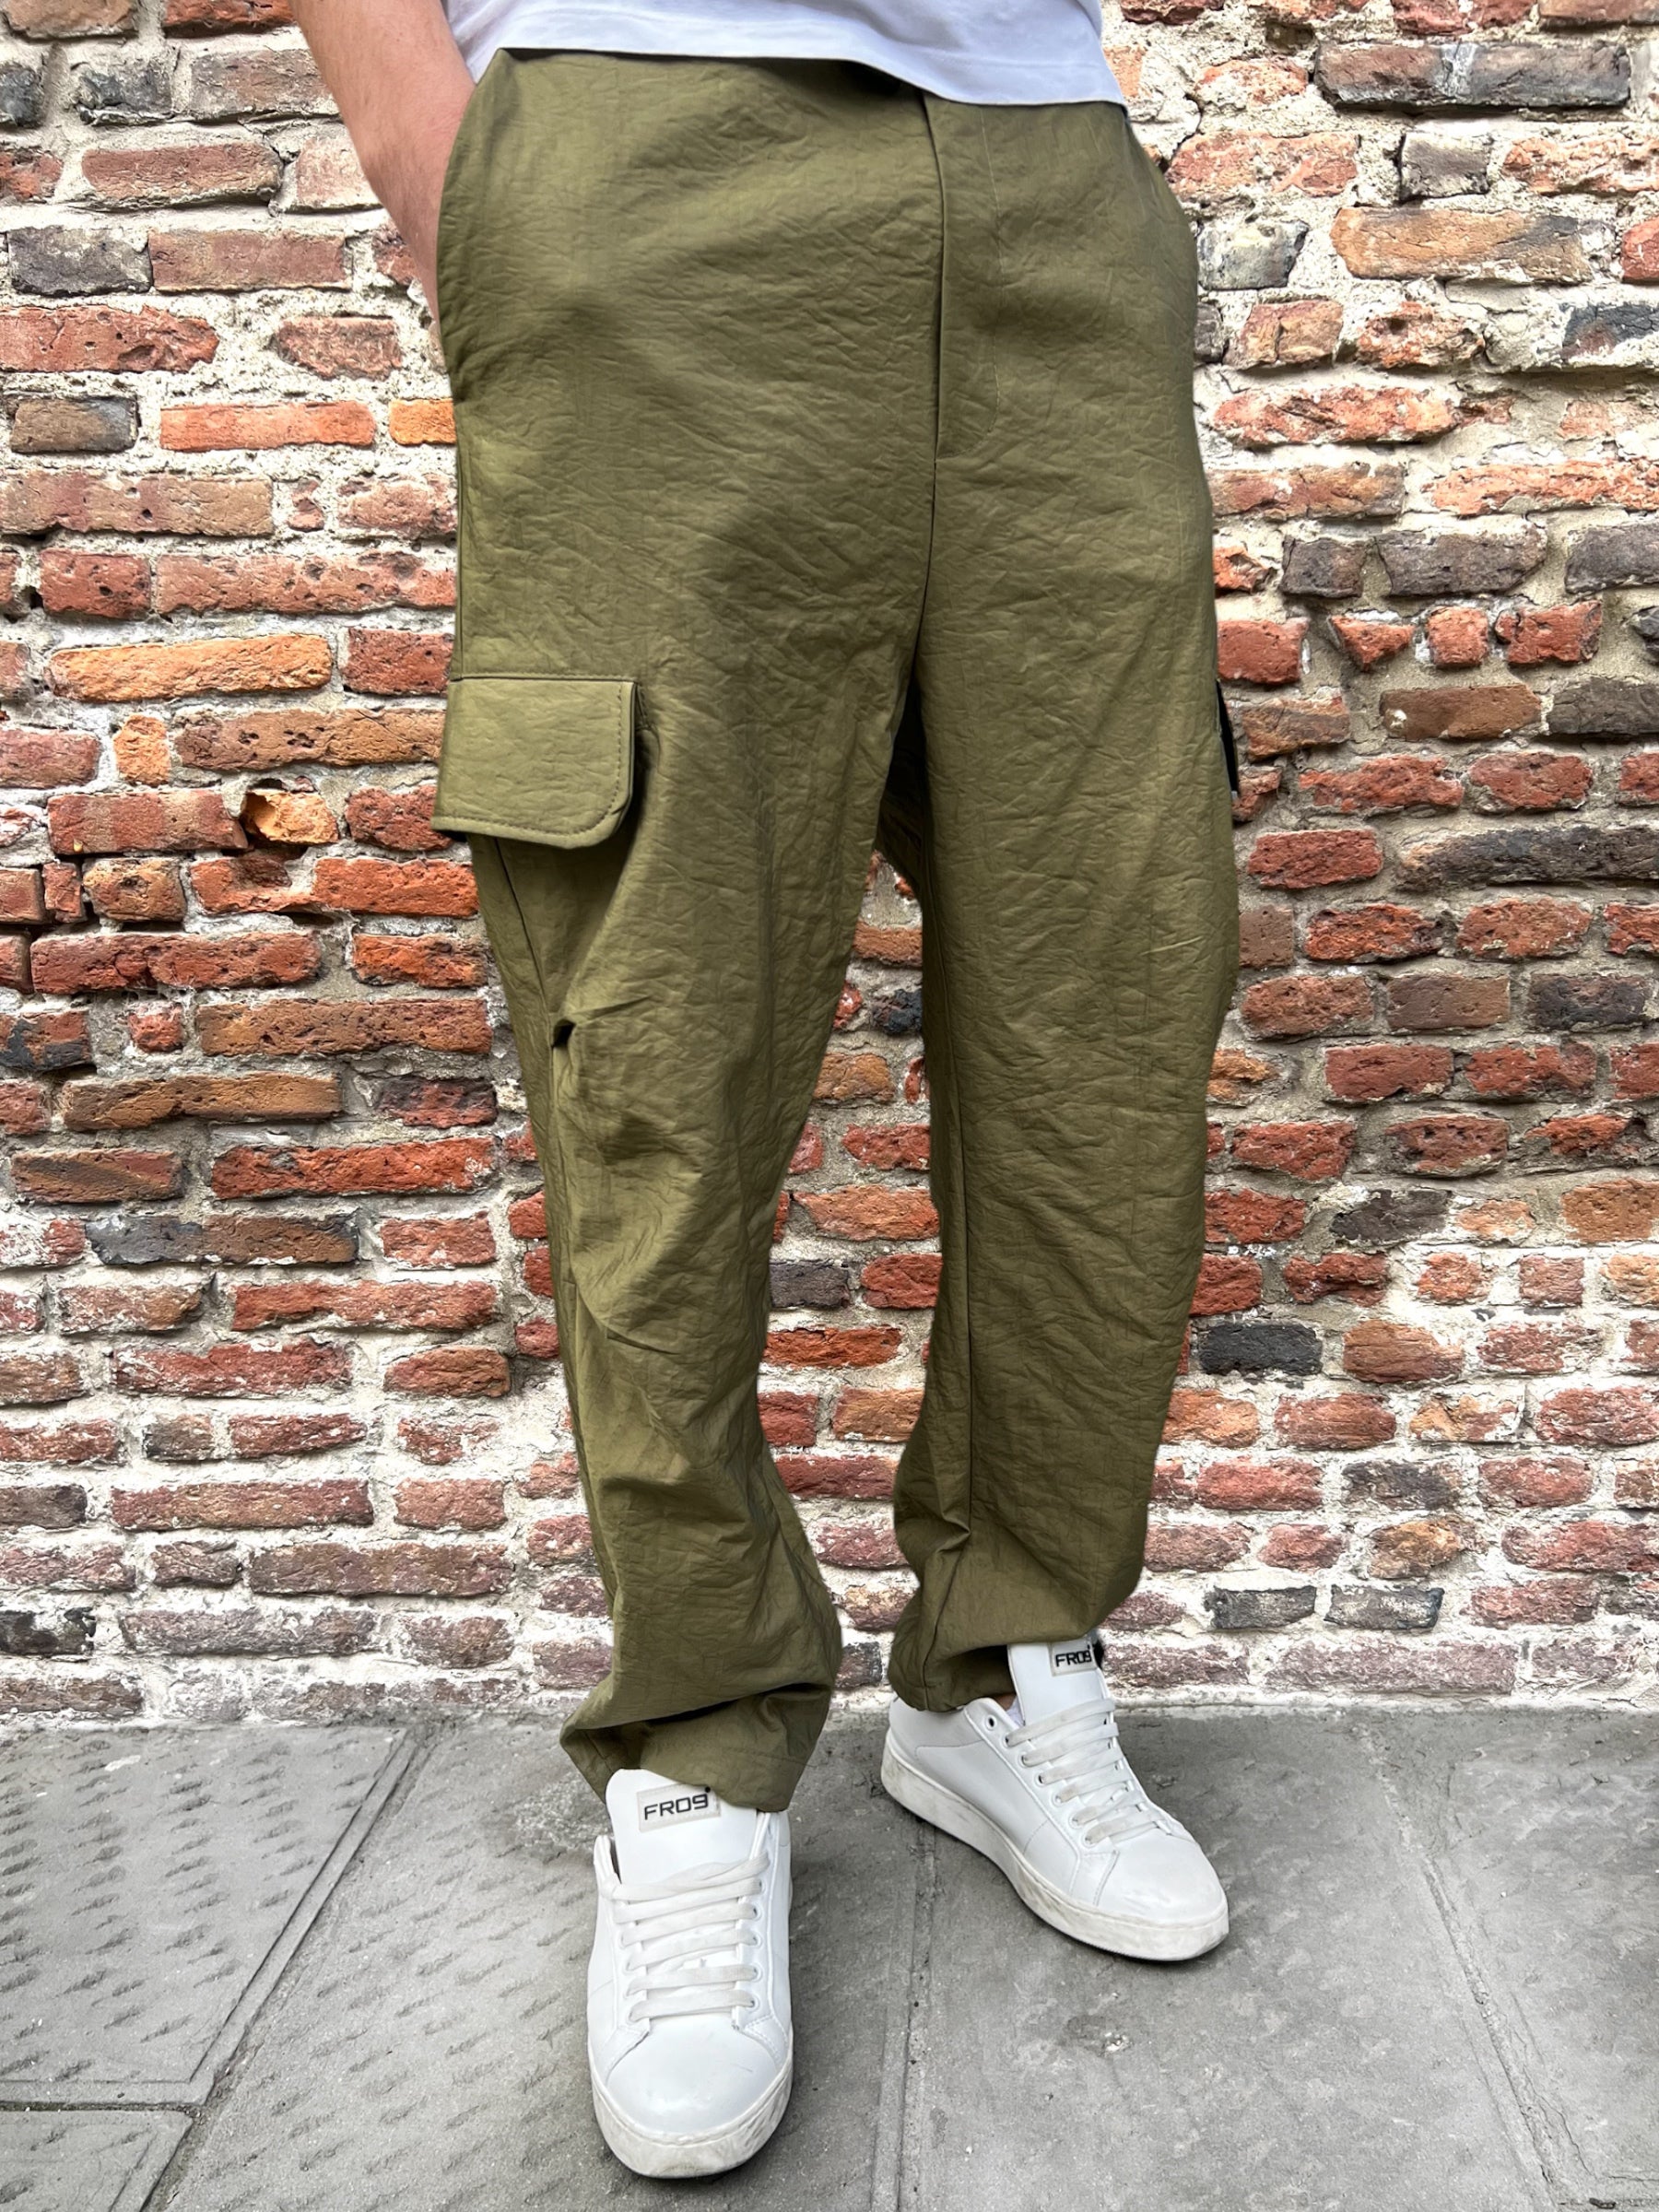 Pantalone Imperial Tasche Army 1737 (8921141412180)